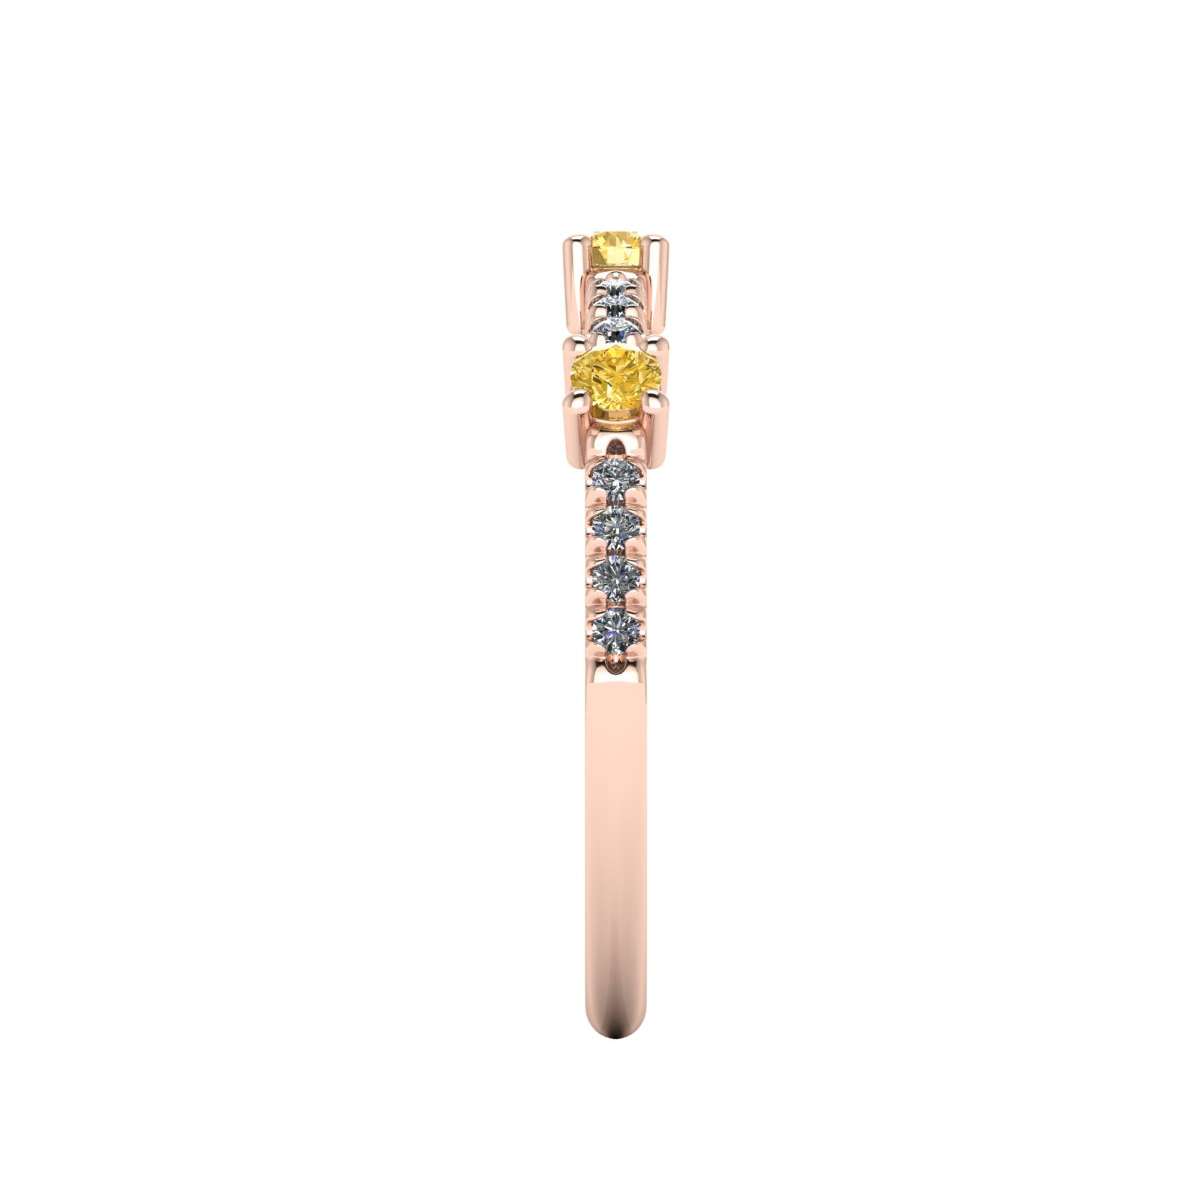 Ring in pink gold and fancy yellow diamonds ct 0.28 